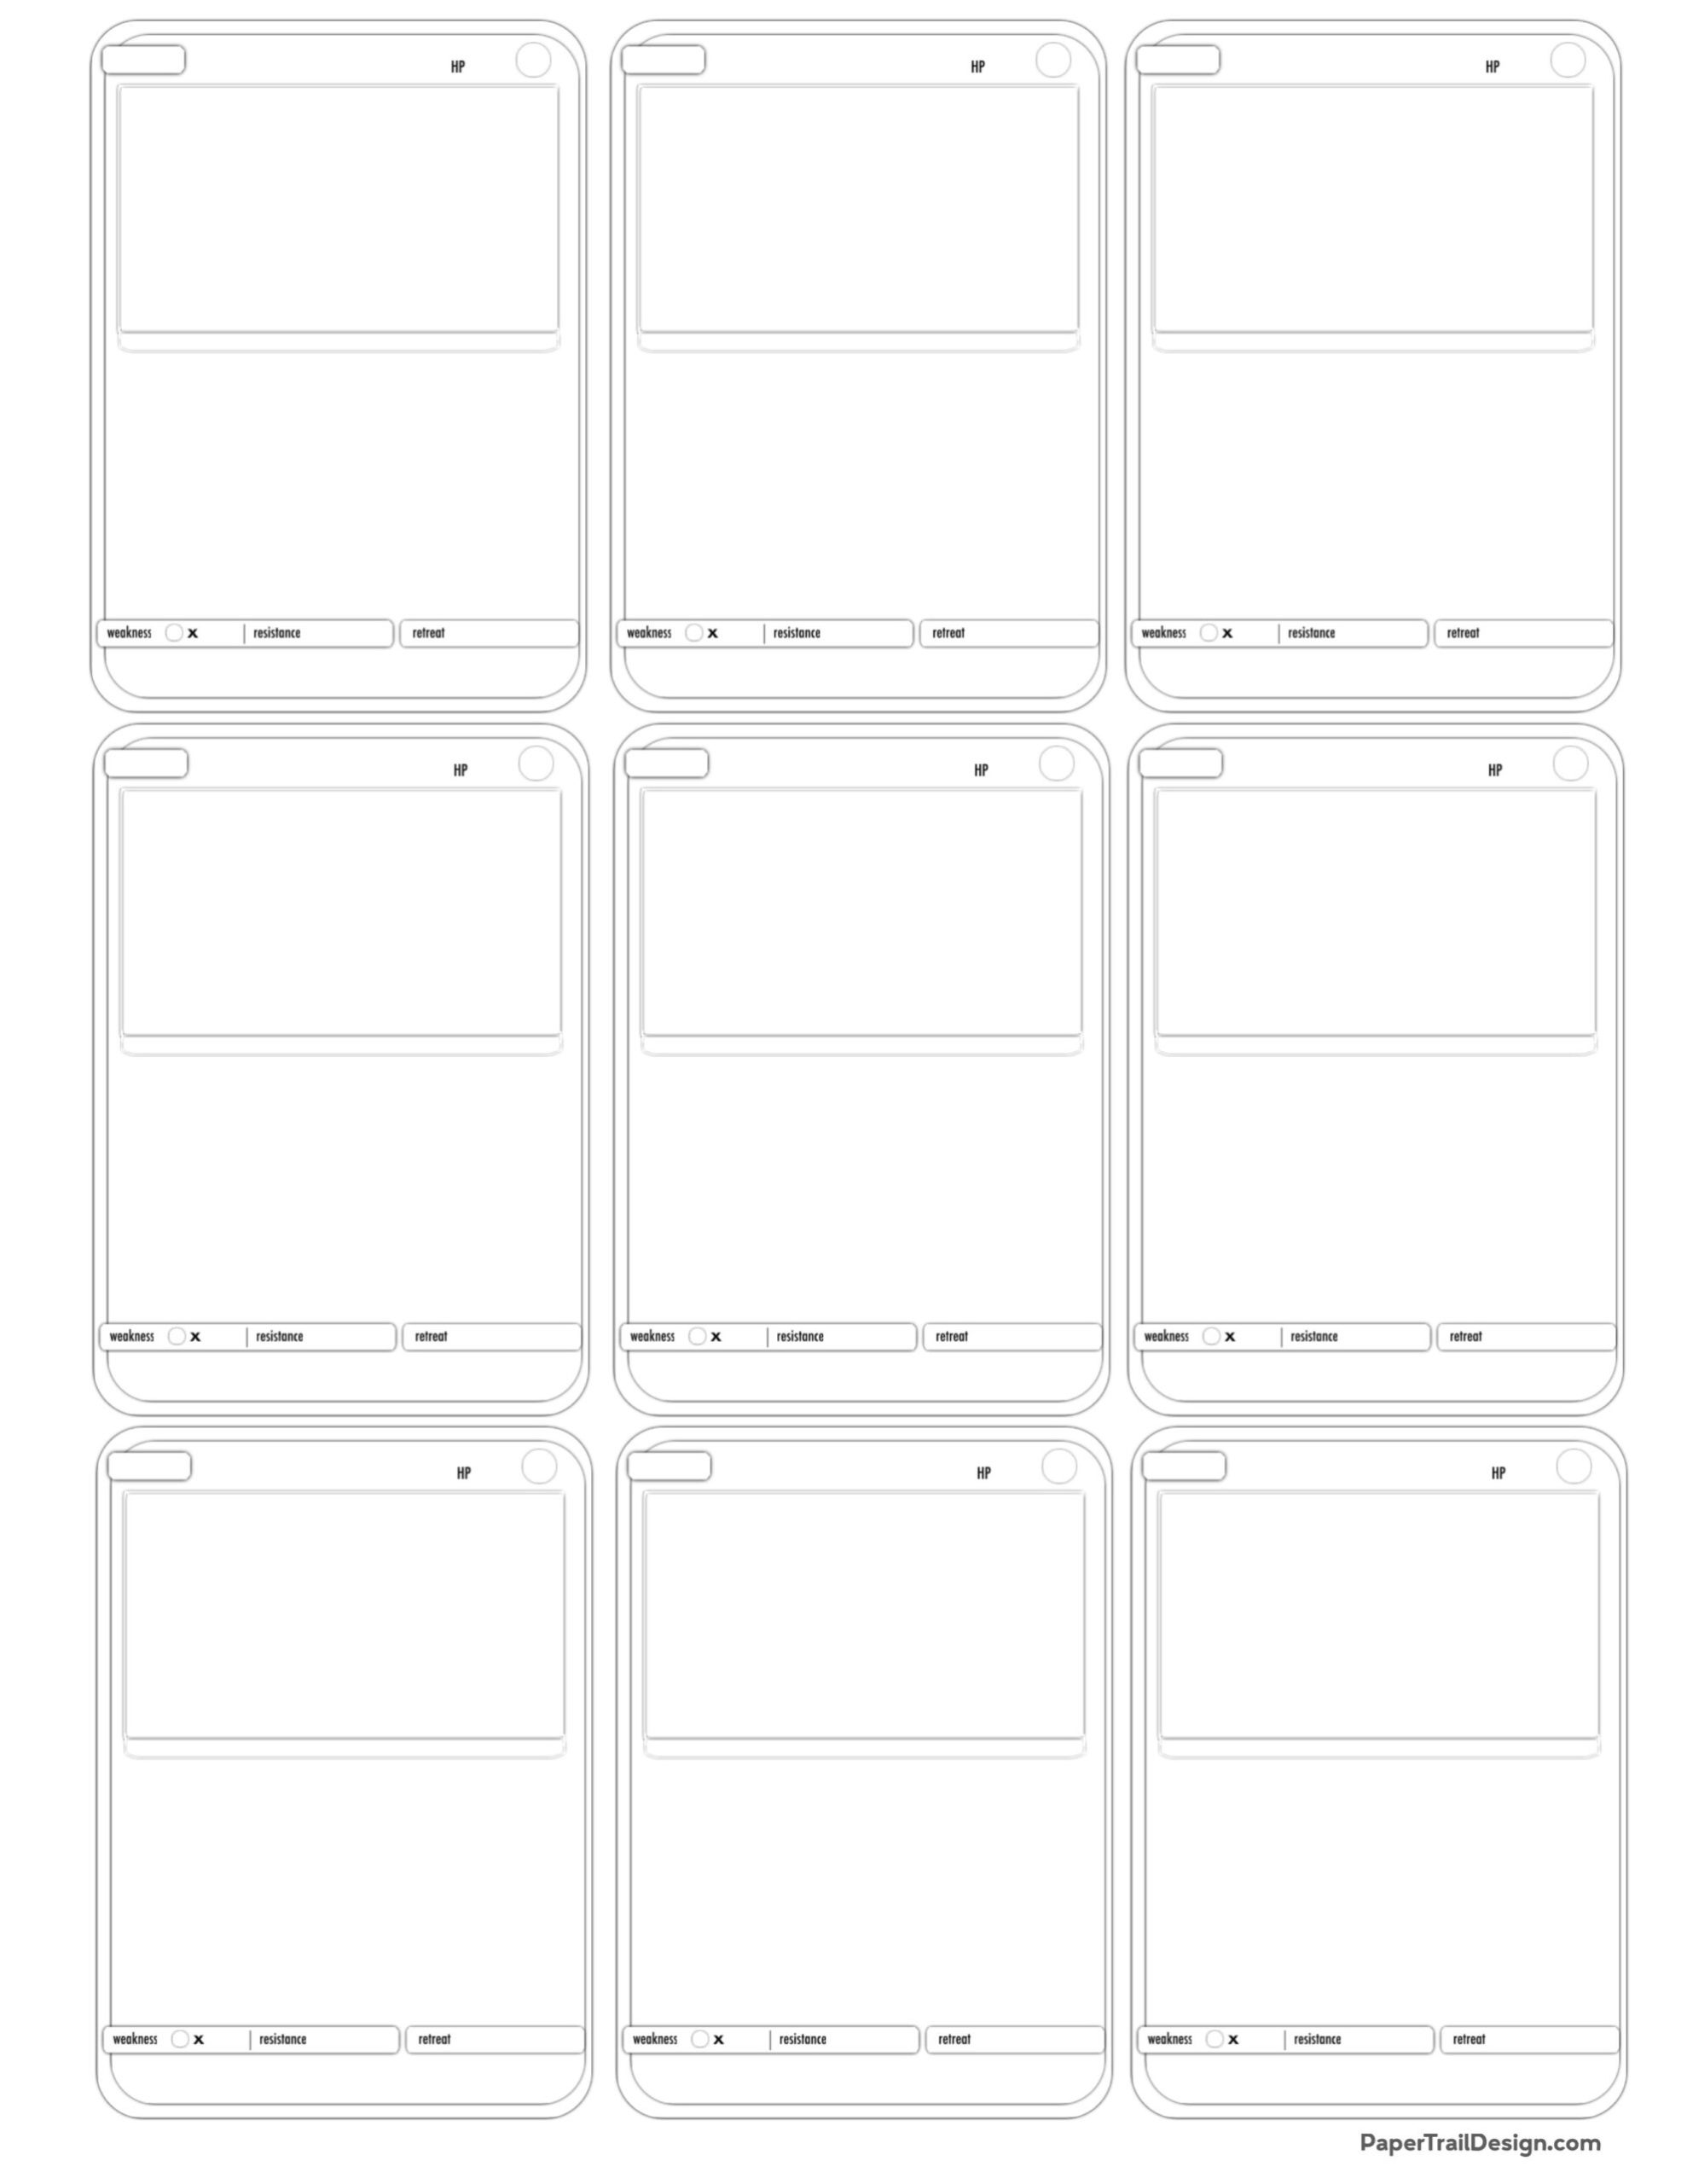 Pokémon Card Template Free Printable - Paper Trail Design Intended For Card Game Template Maker